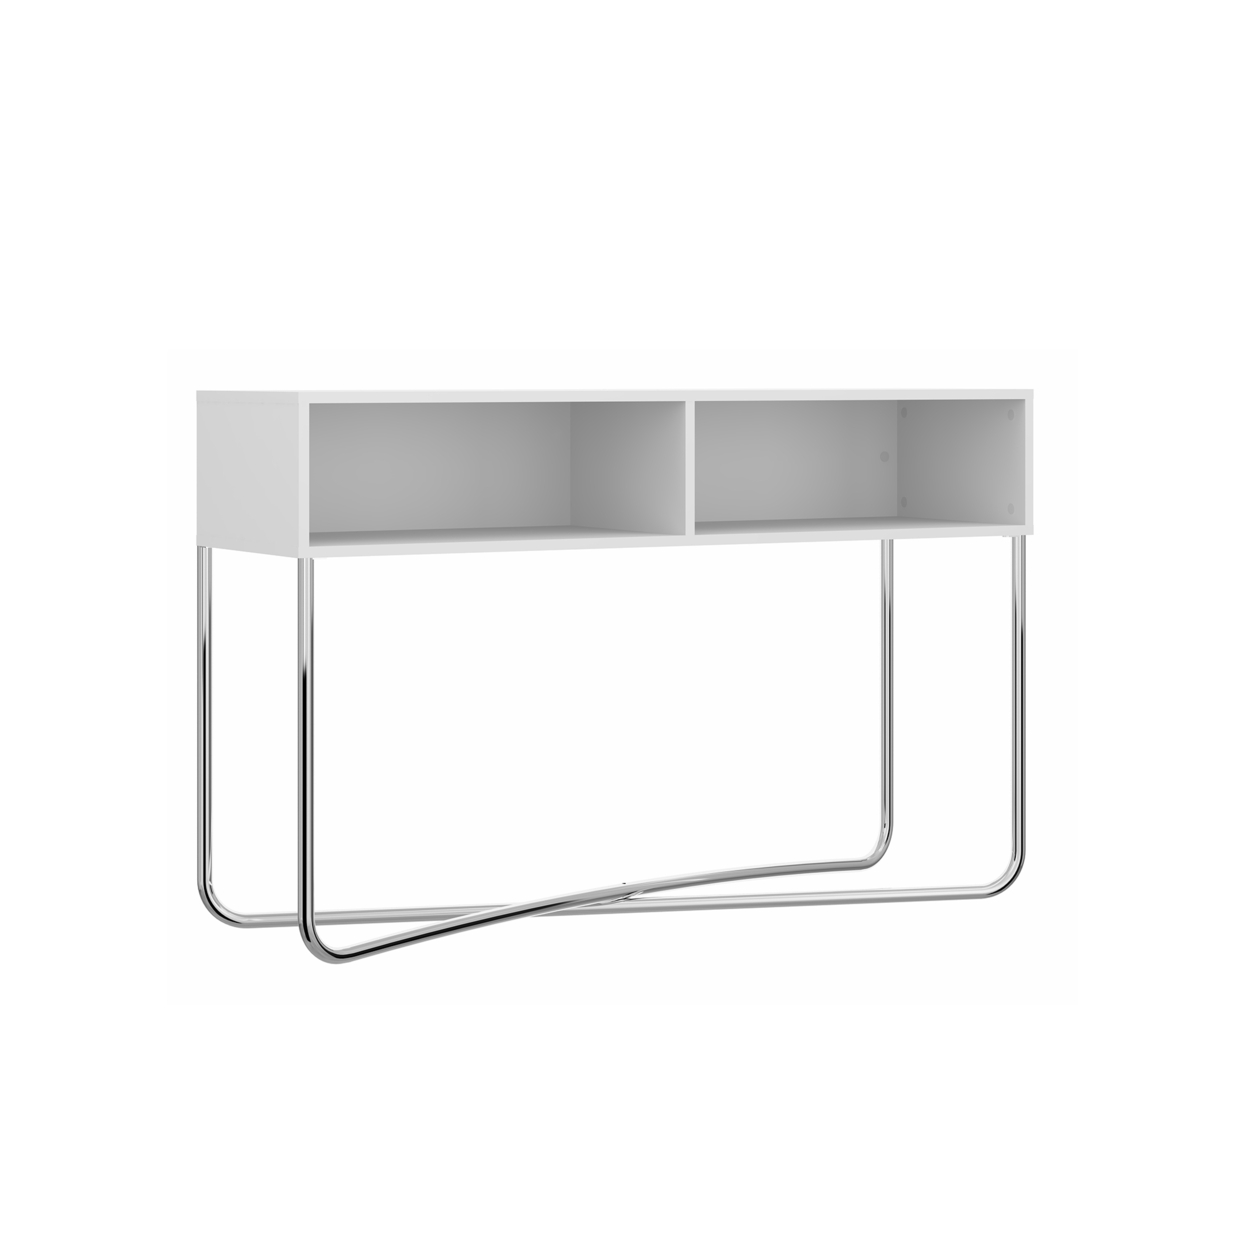 Wooden Console Table With 2 Open Compartments And Metal Frame, White And Chrome- Saltoro Sherpi